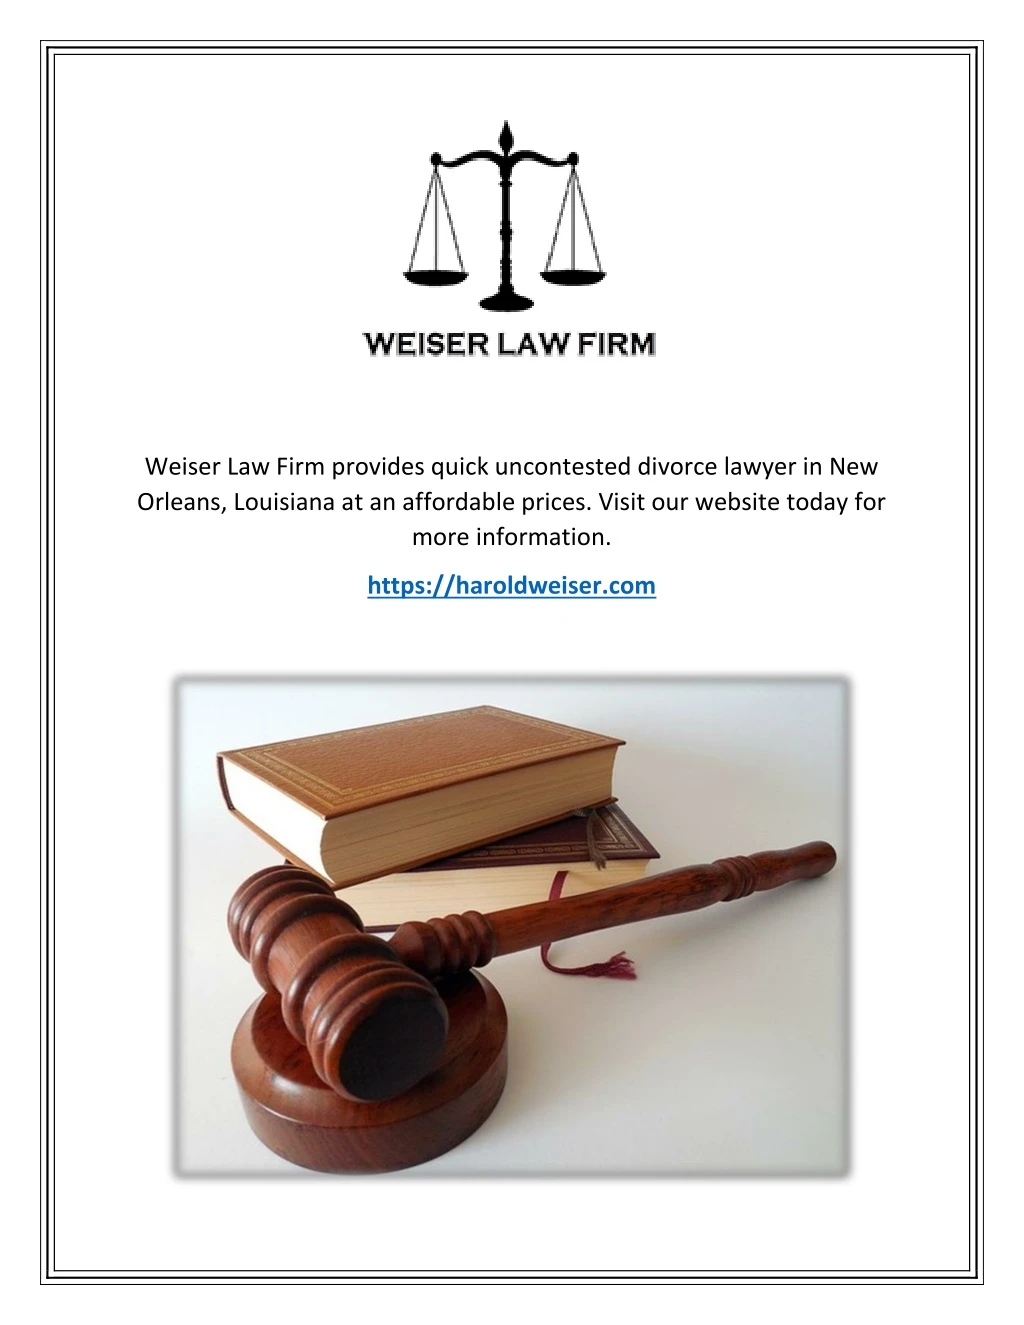 weiser law firm provides quick uncontested